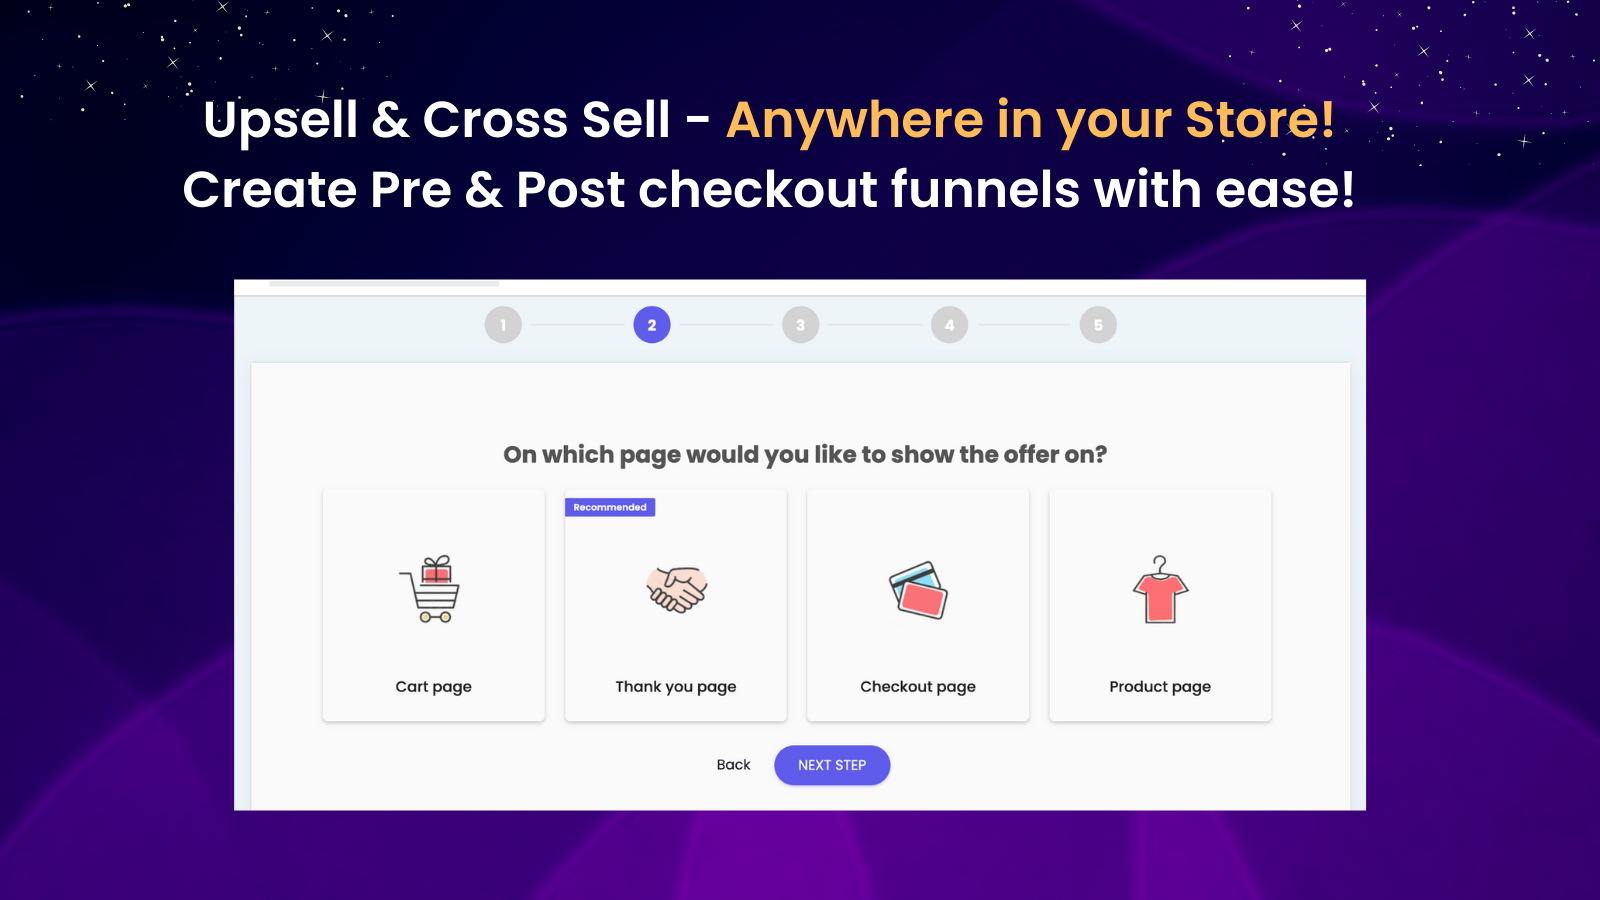 Upsell & Cross sell anywhere in your store.